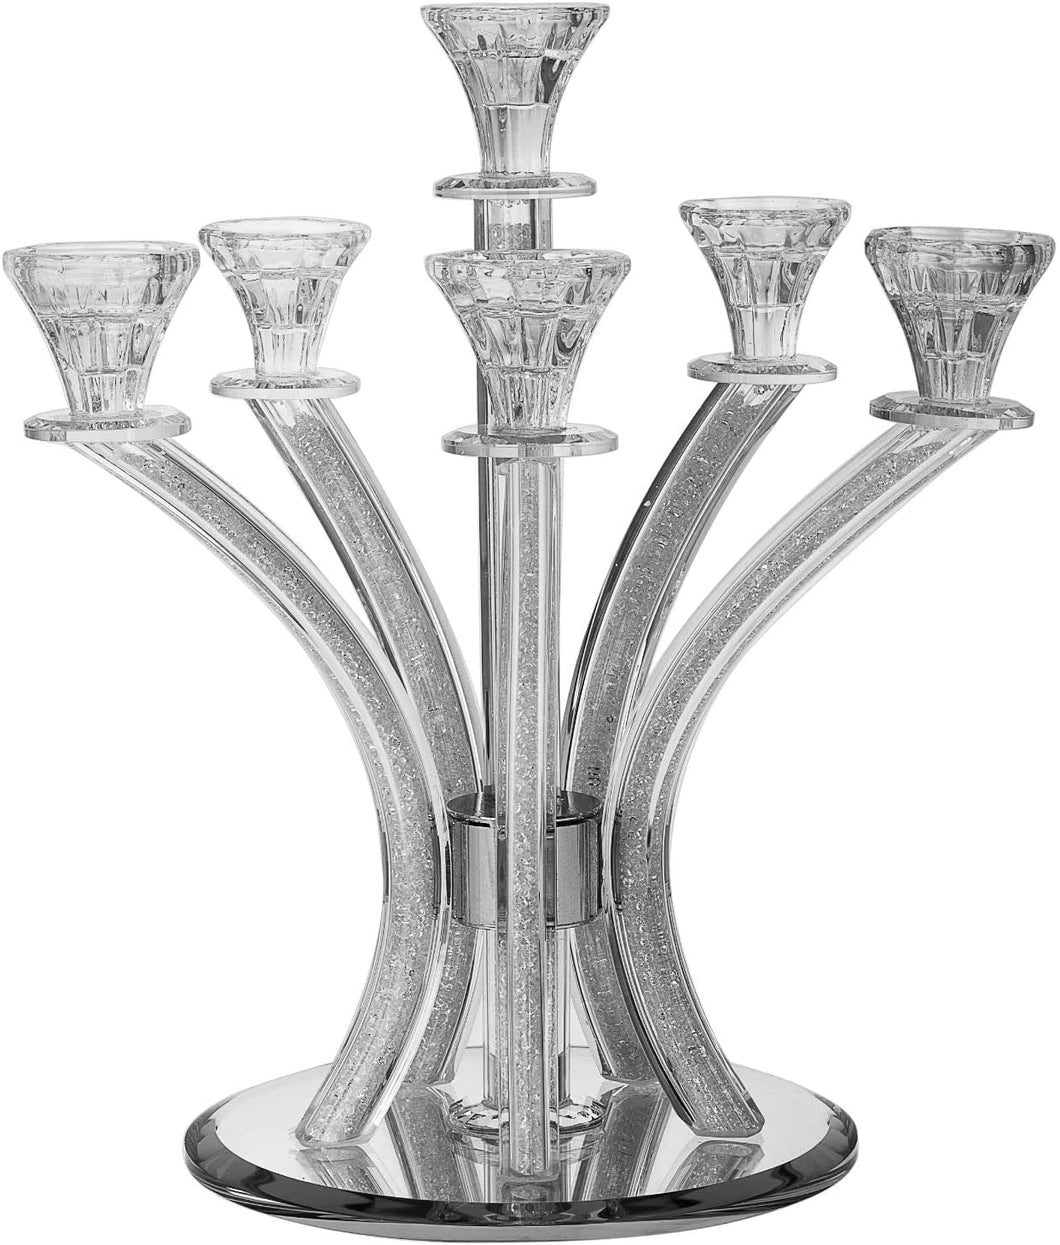 (D) Candelabra Crystal with Stones 6 Branches 16x13 Inch Modern Judaica Design